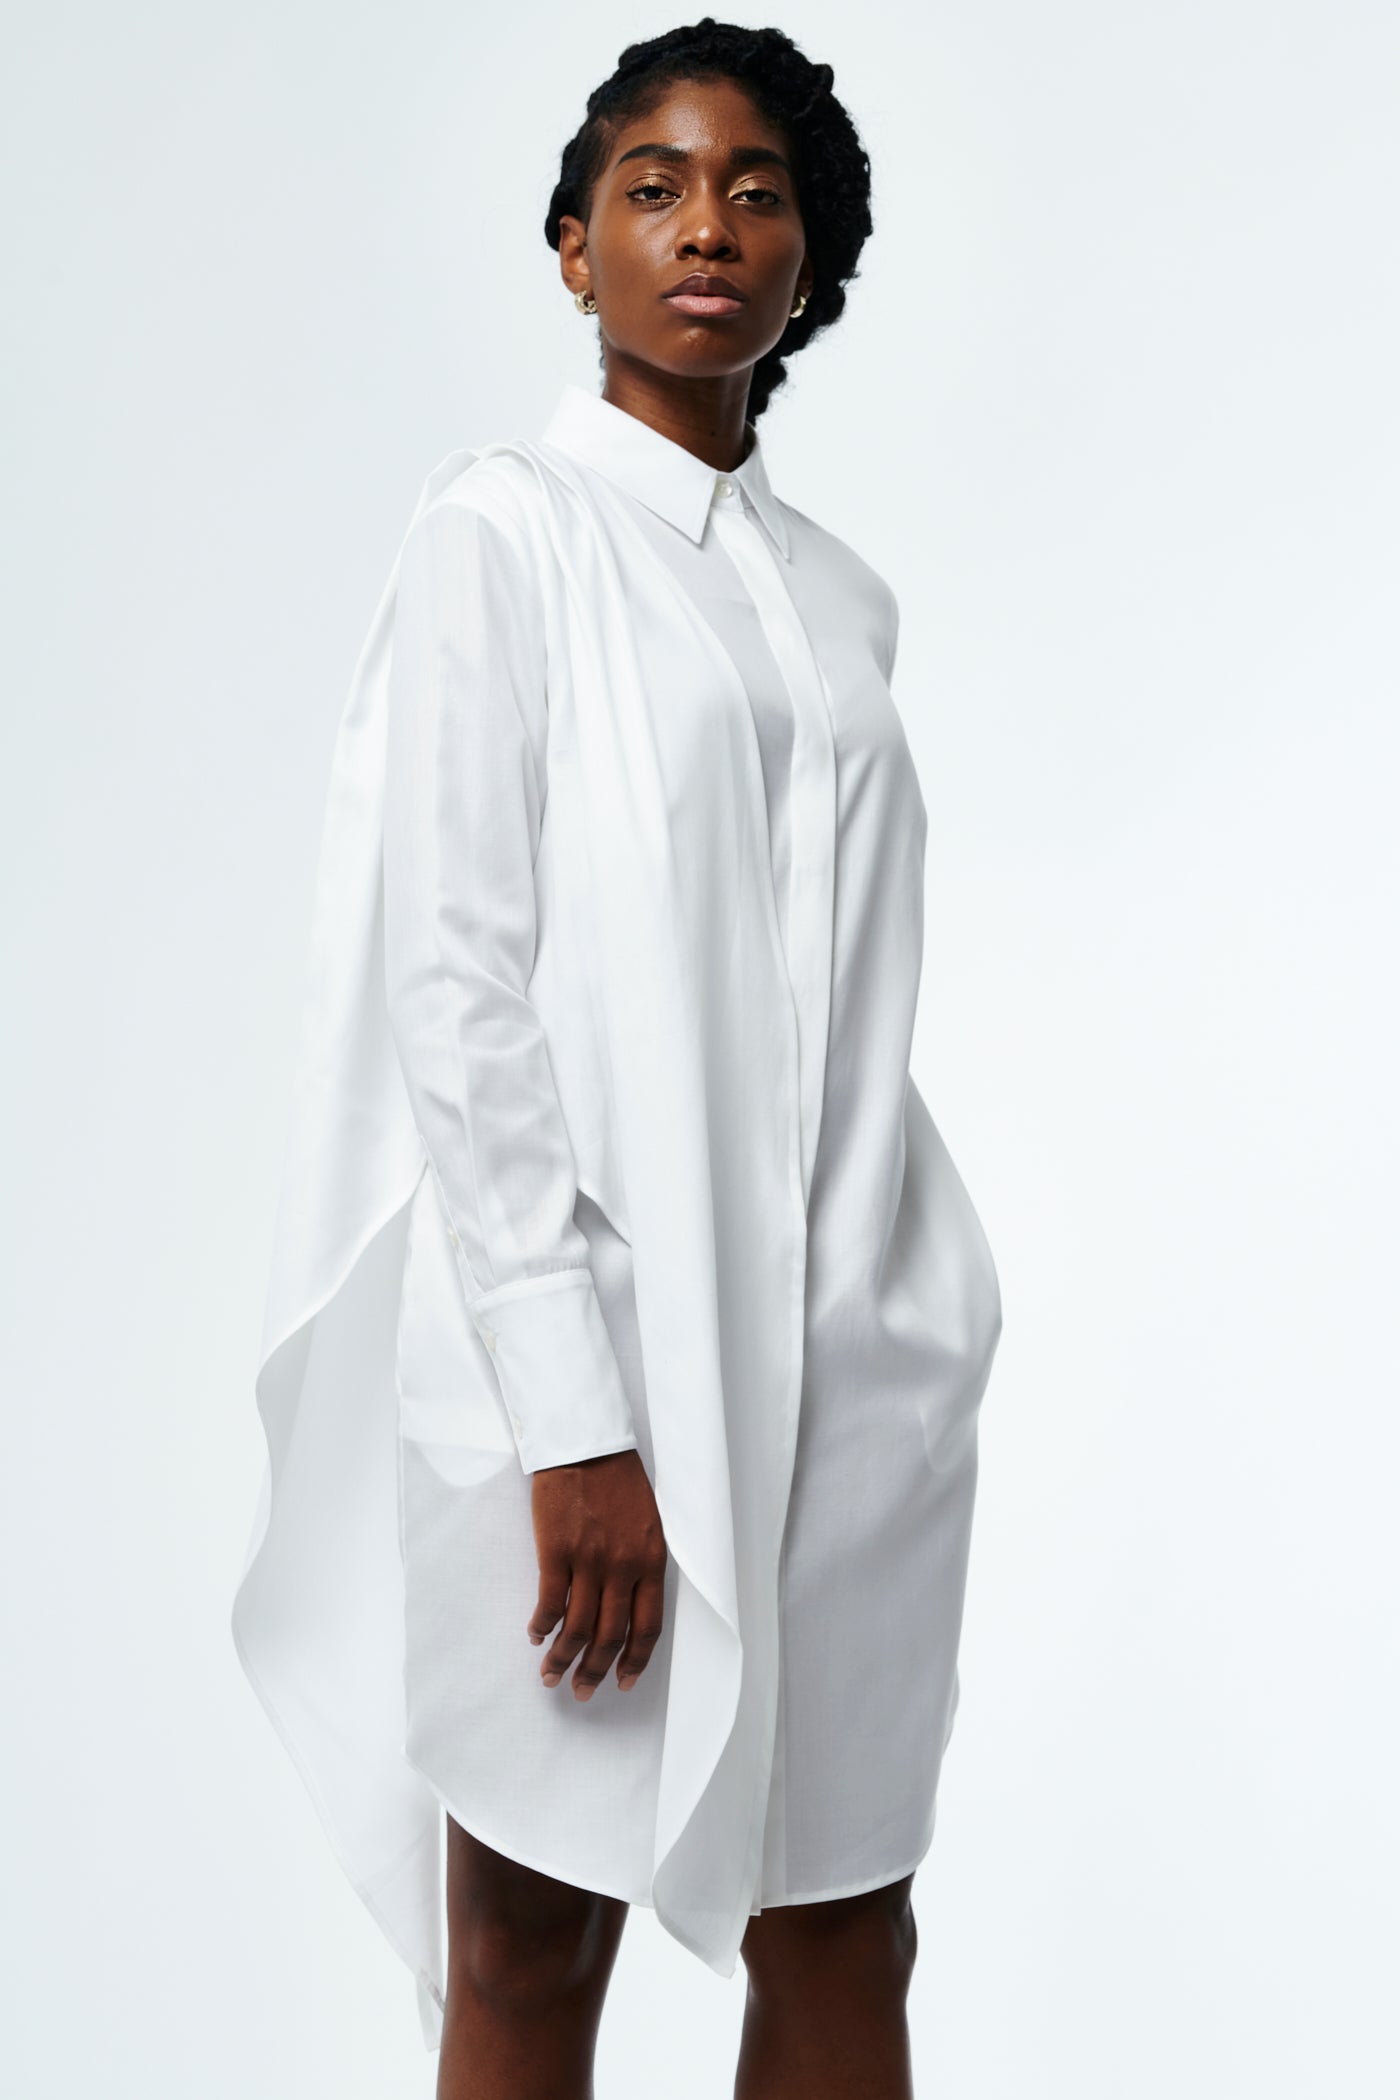 COS Oversized-Fit Wool T-Shirt Dress in OFF-WHITE